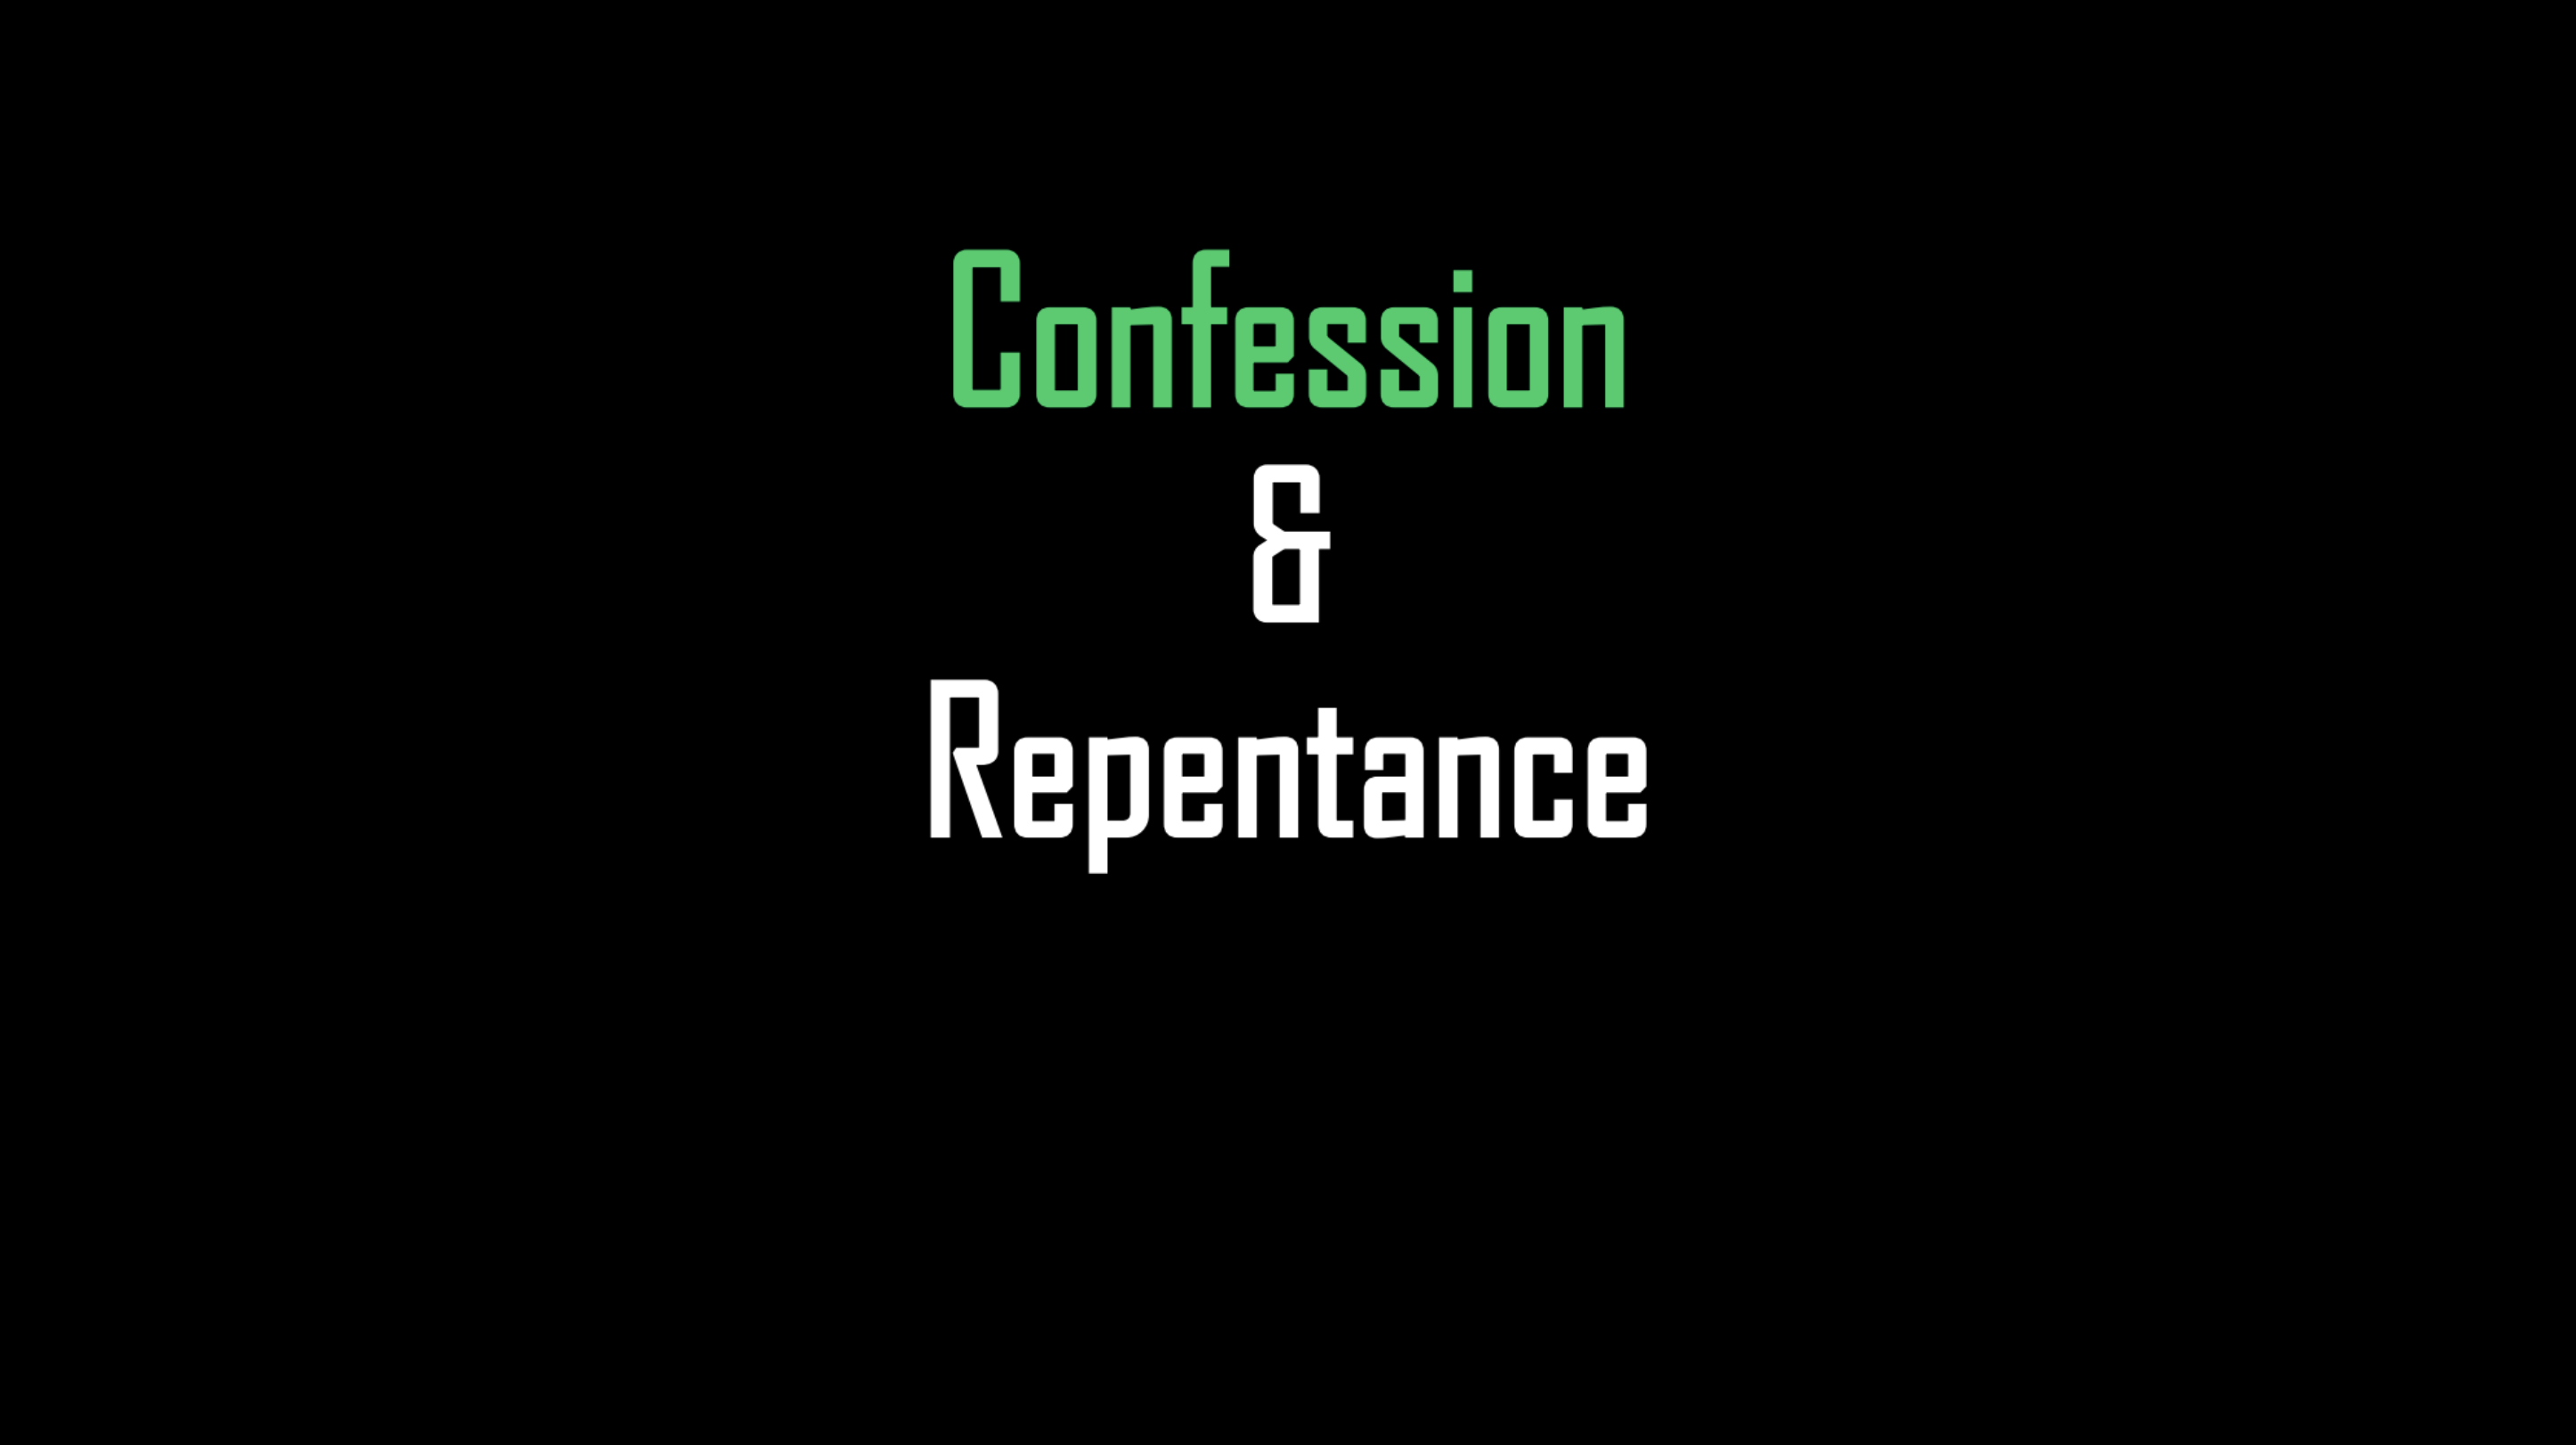 Confession and Repentance